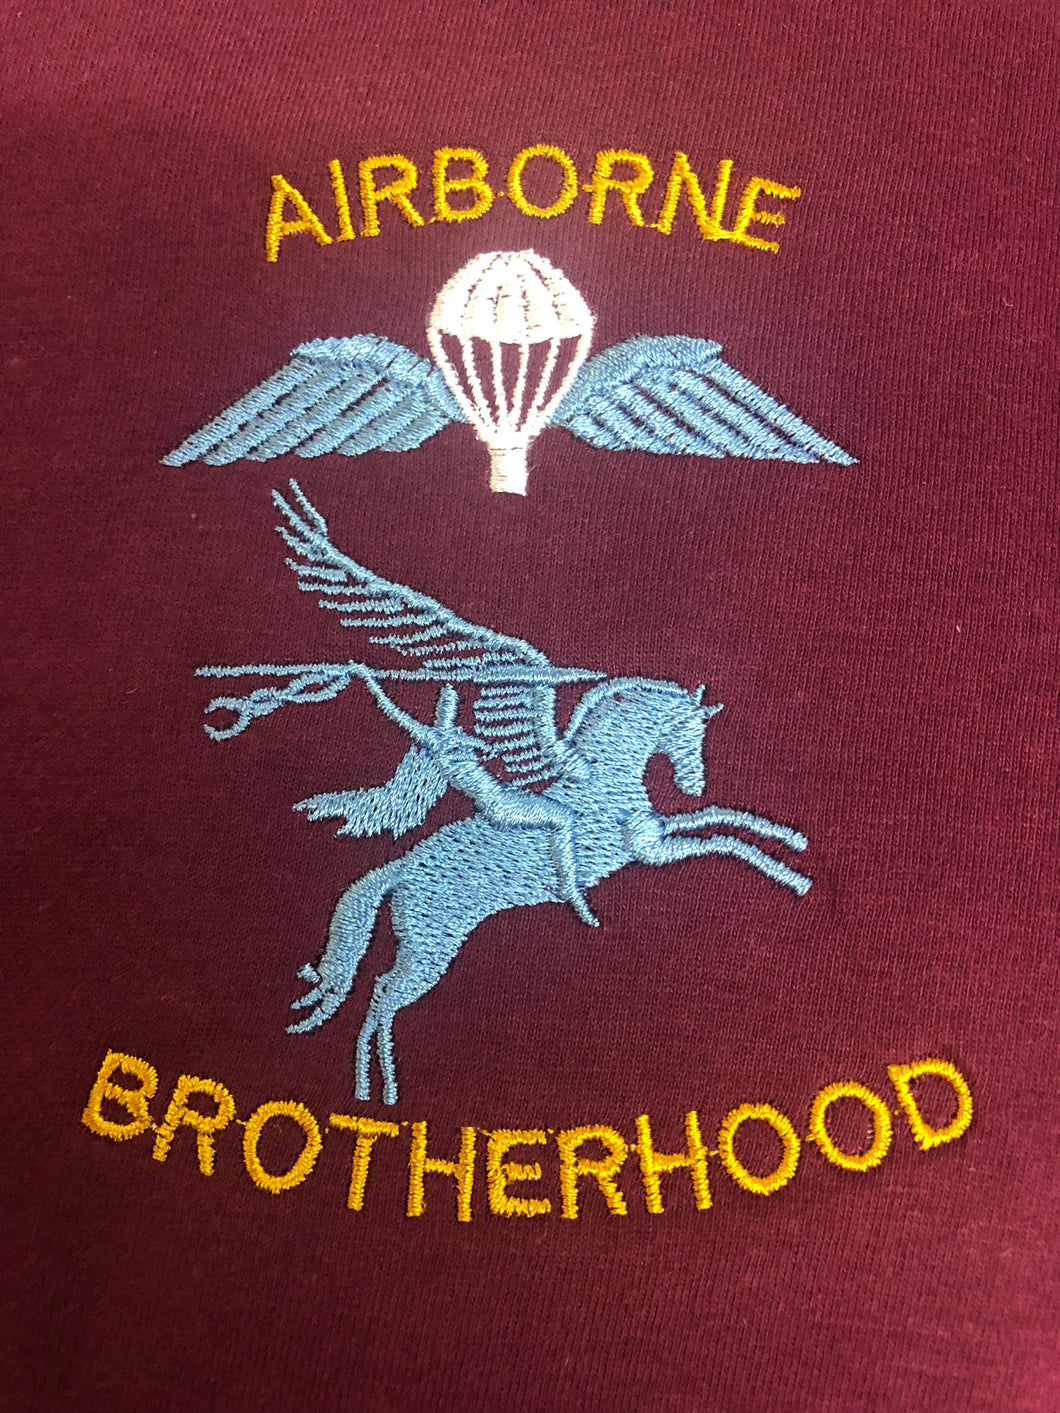 Airborne Brotherhood - Embroidered - Choose your Garment